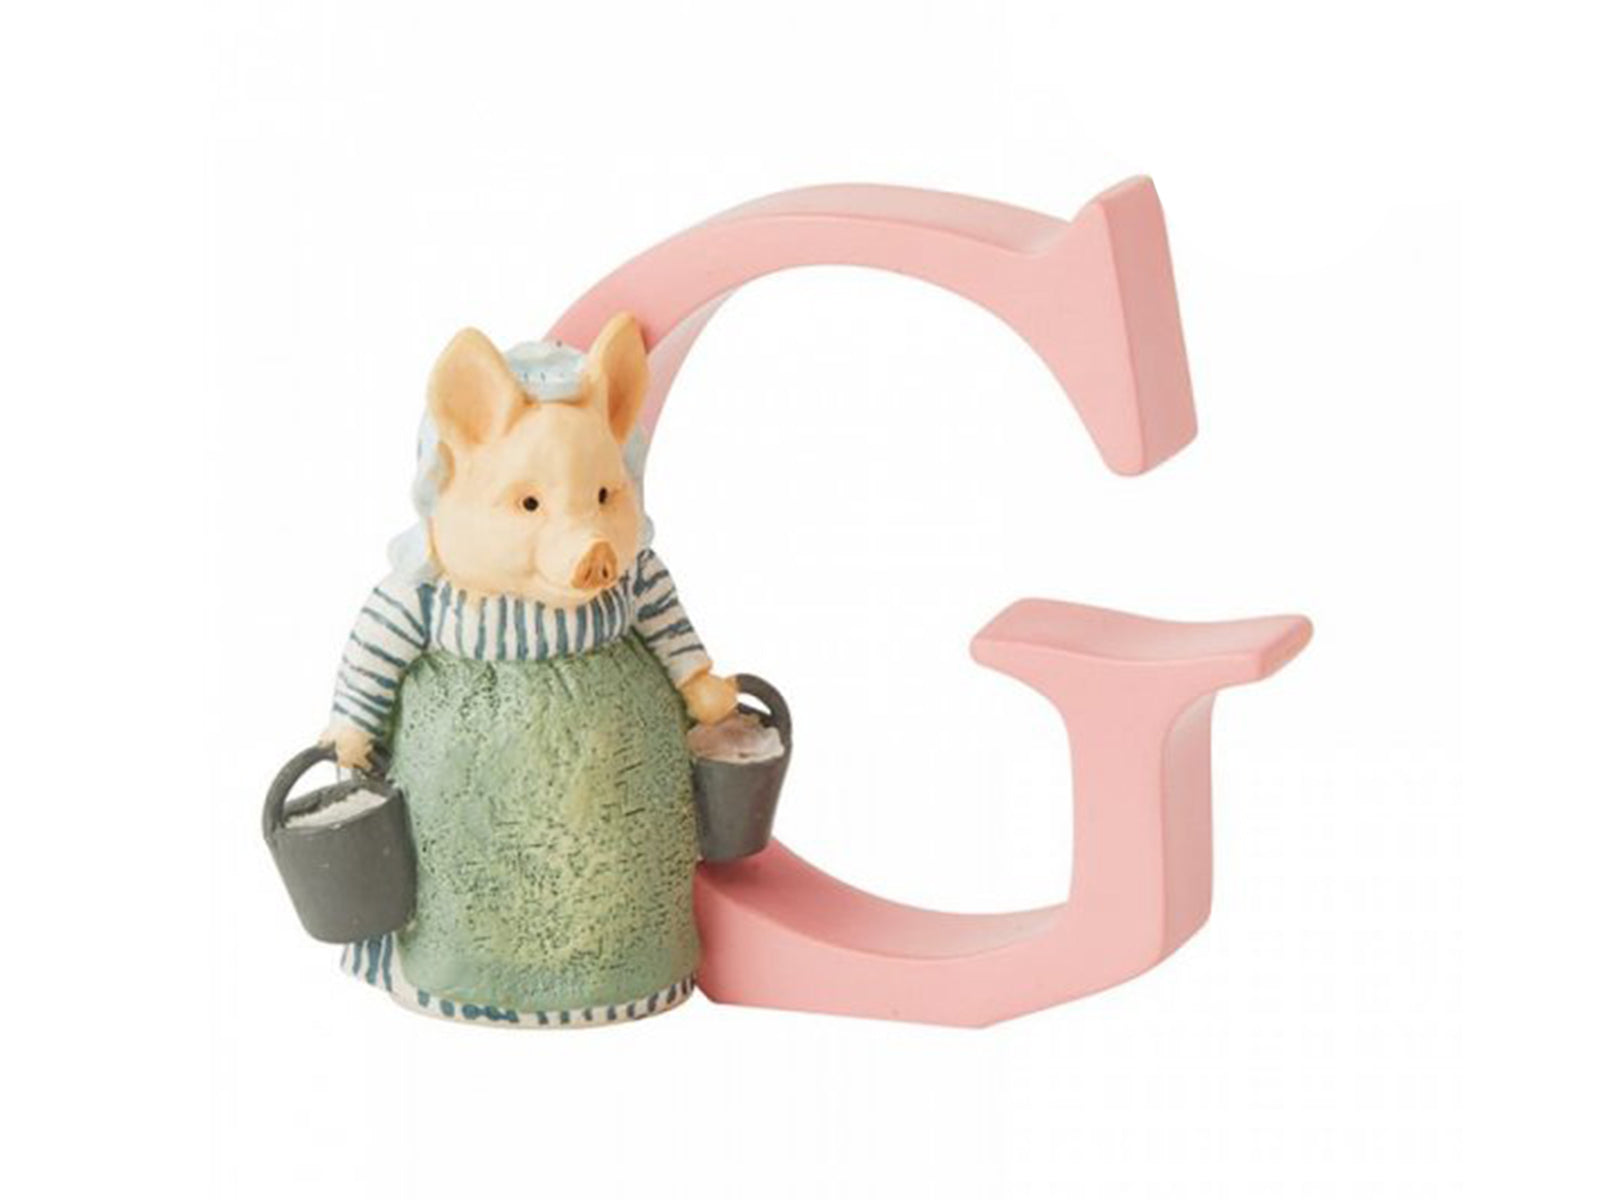 A pastel pink letter G with an old white pig wearing a blue and white striped dress, carrying a pail of milk and a basket